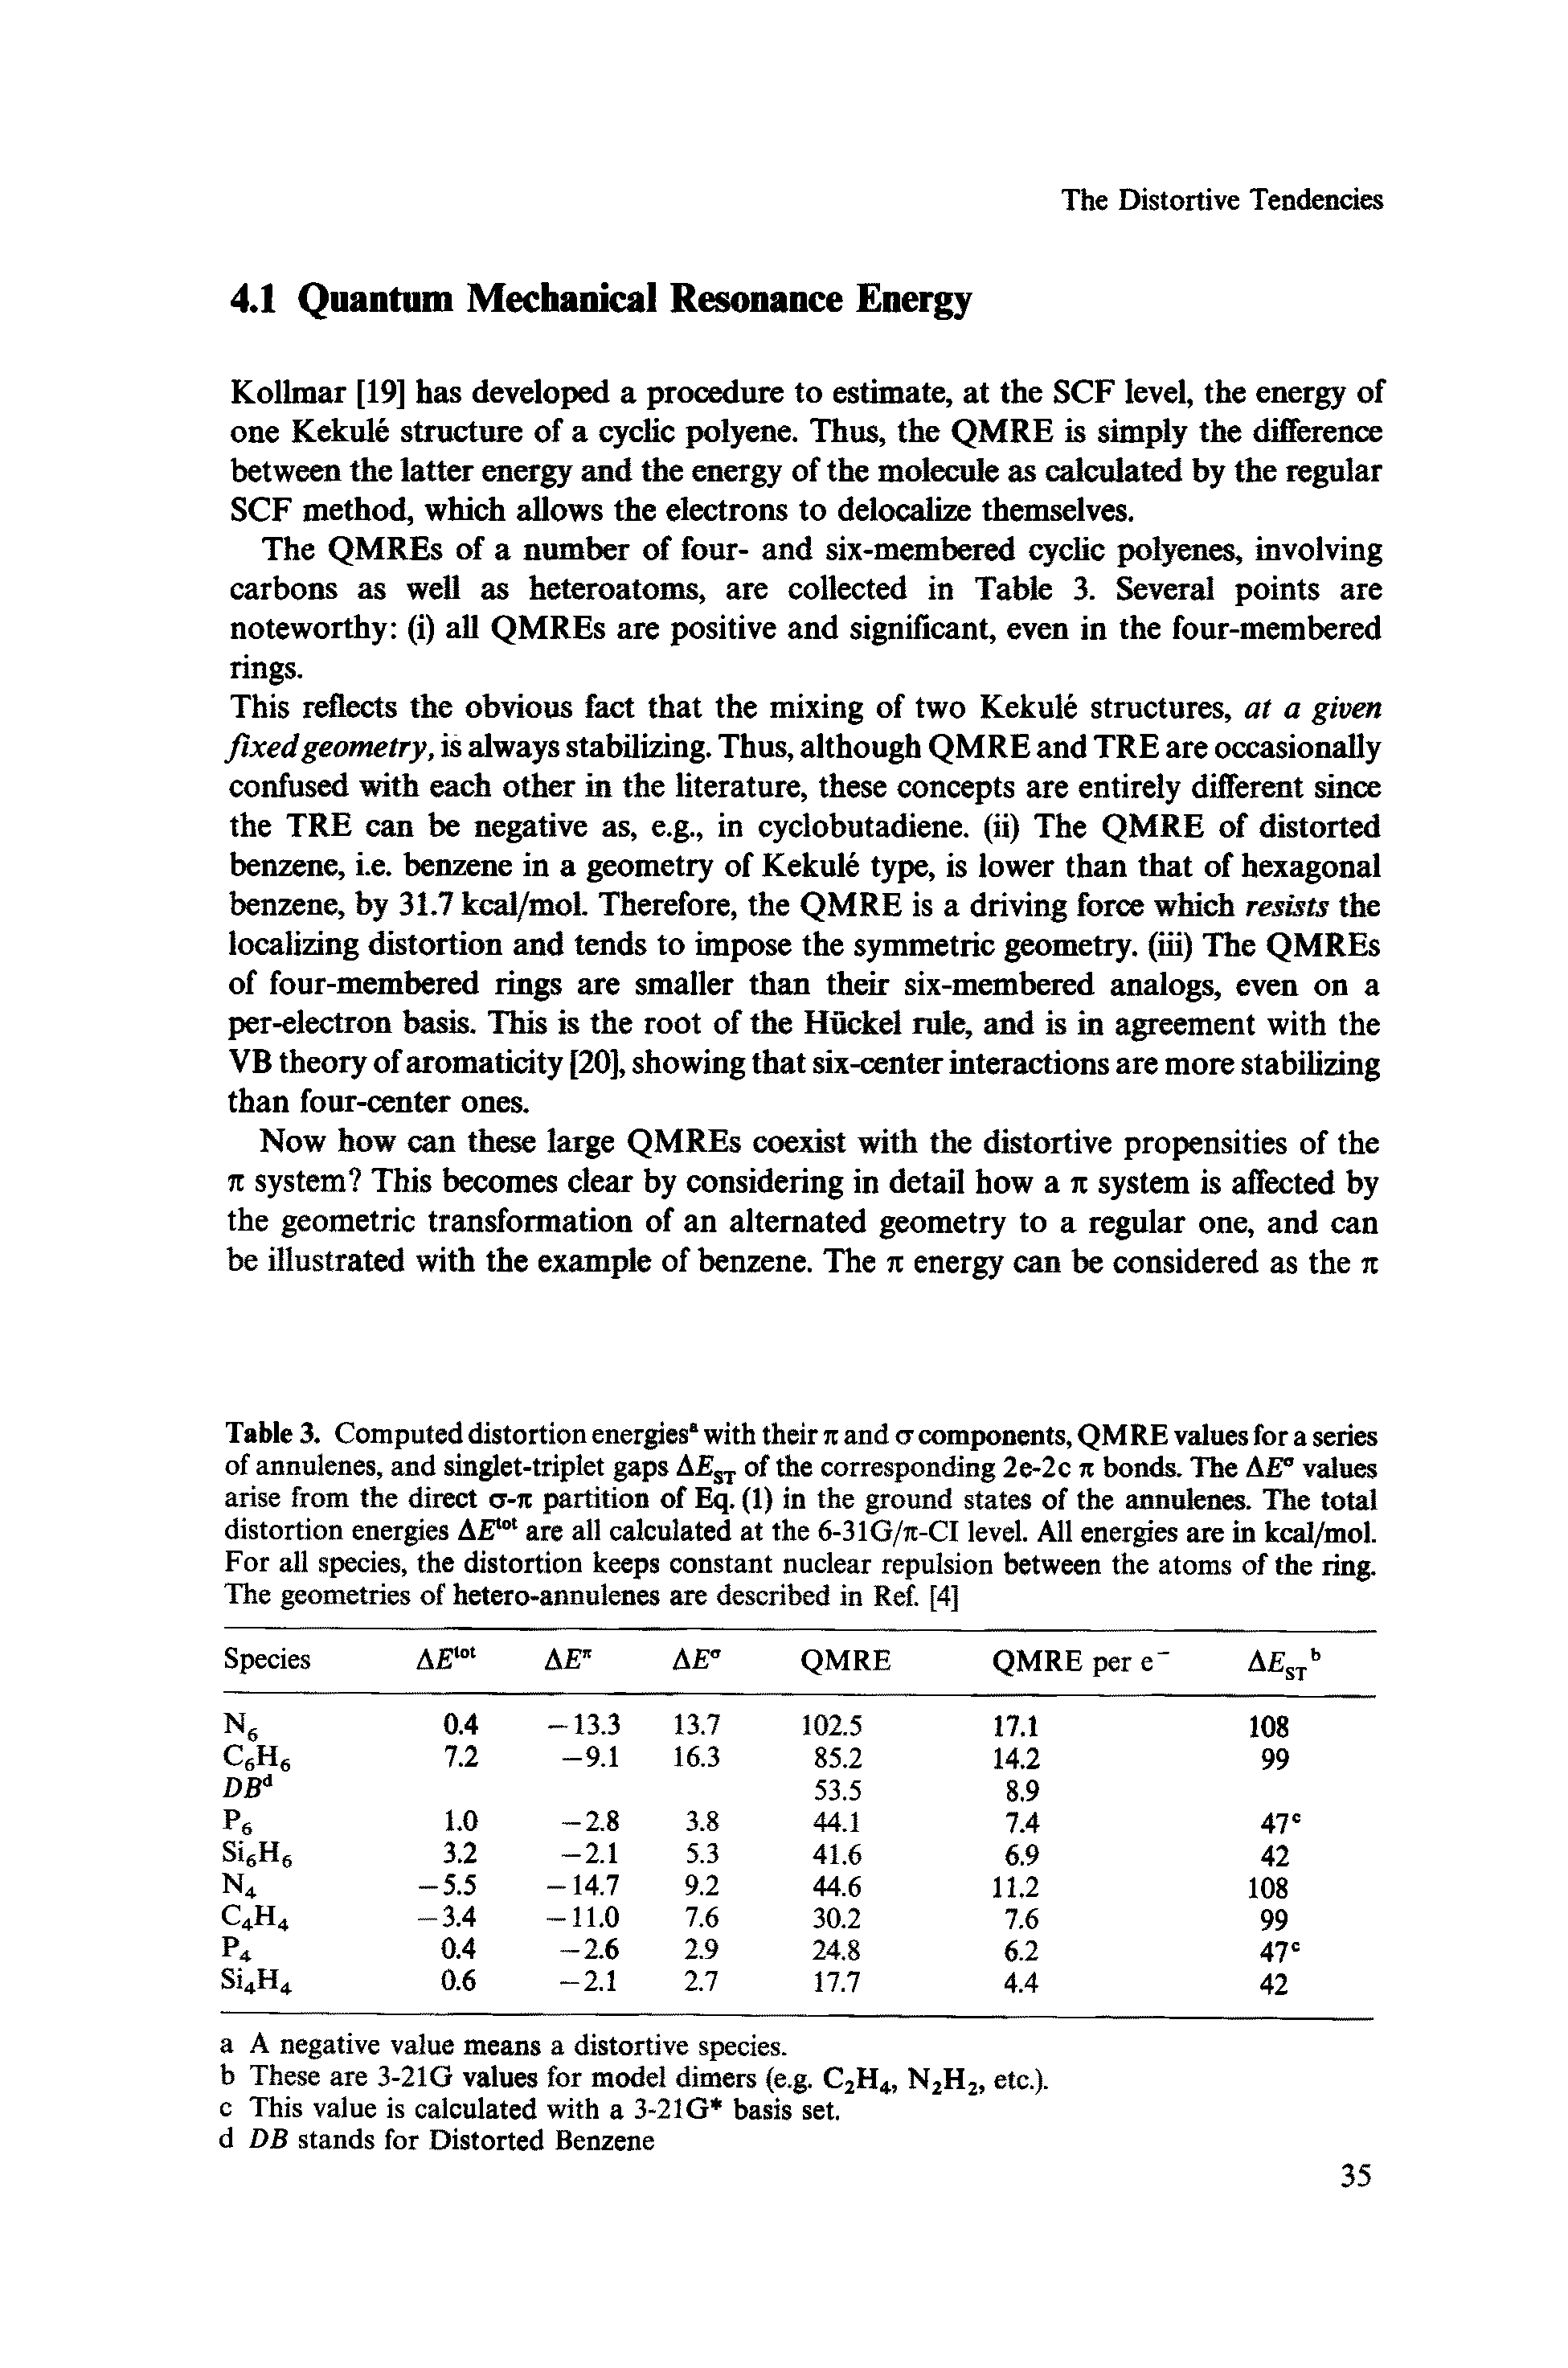 Table 3. Computed distortion energies with their n and cr components, QMRE values for a series of annulenes, and singlet-triplet gaps A ST of the corresponding 2e-2c n bonds. The A ° values arise from the direct a-n partition of Eq. (1) in the ground states of the annulenes. The total distortion energies AEtot are all calculated at the 6-31G/7t-CI level. All energies are in kcal/mol. For all species, the distortion keeps constant nuclear repulsion between the atoms of the ring. The geometries of hetero-annulenes are described in Ref. [4]...